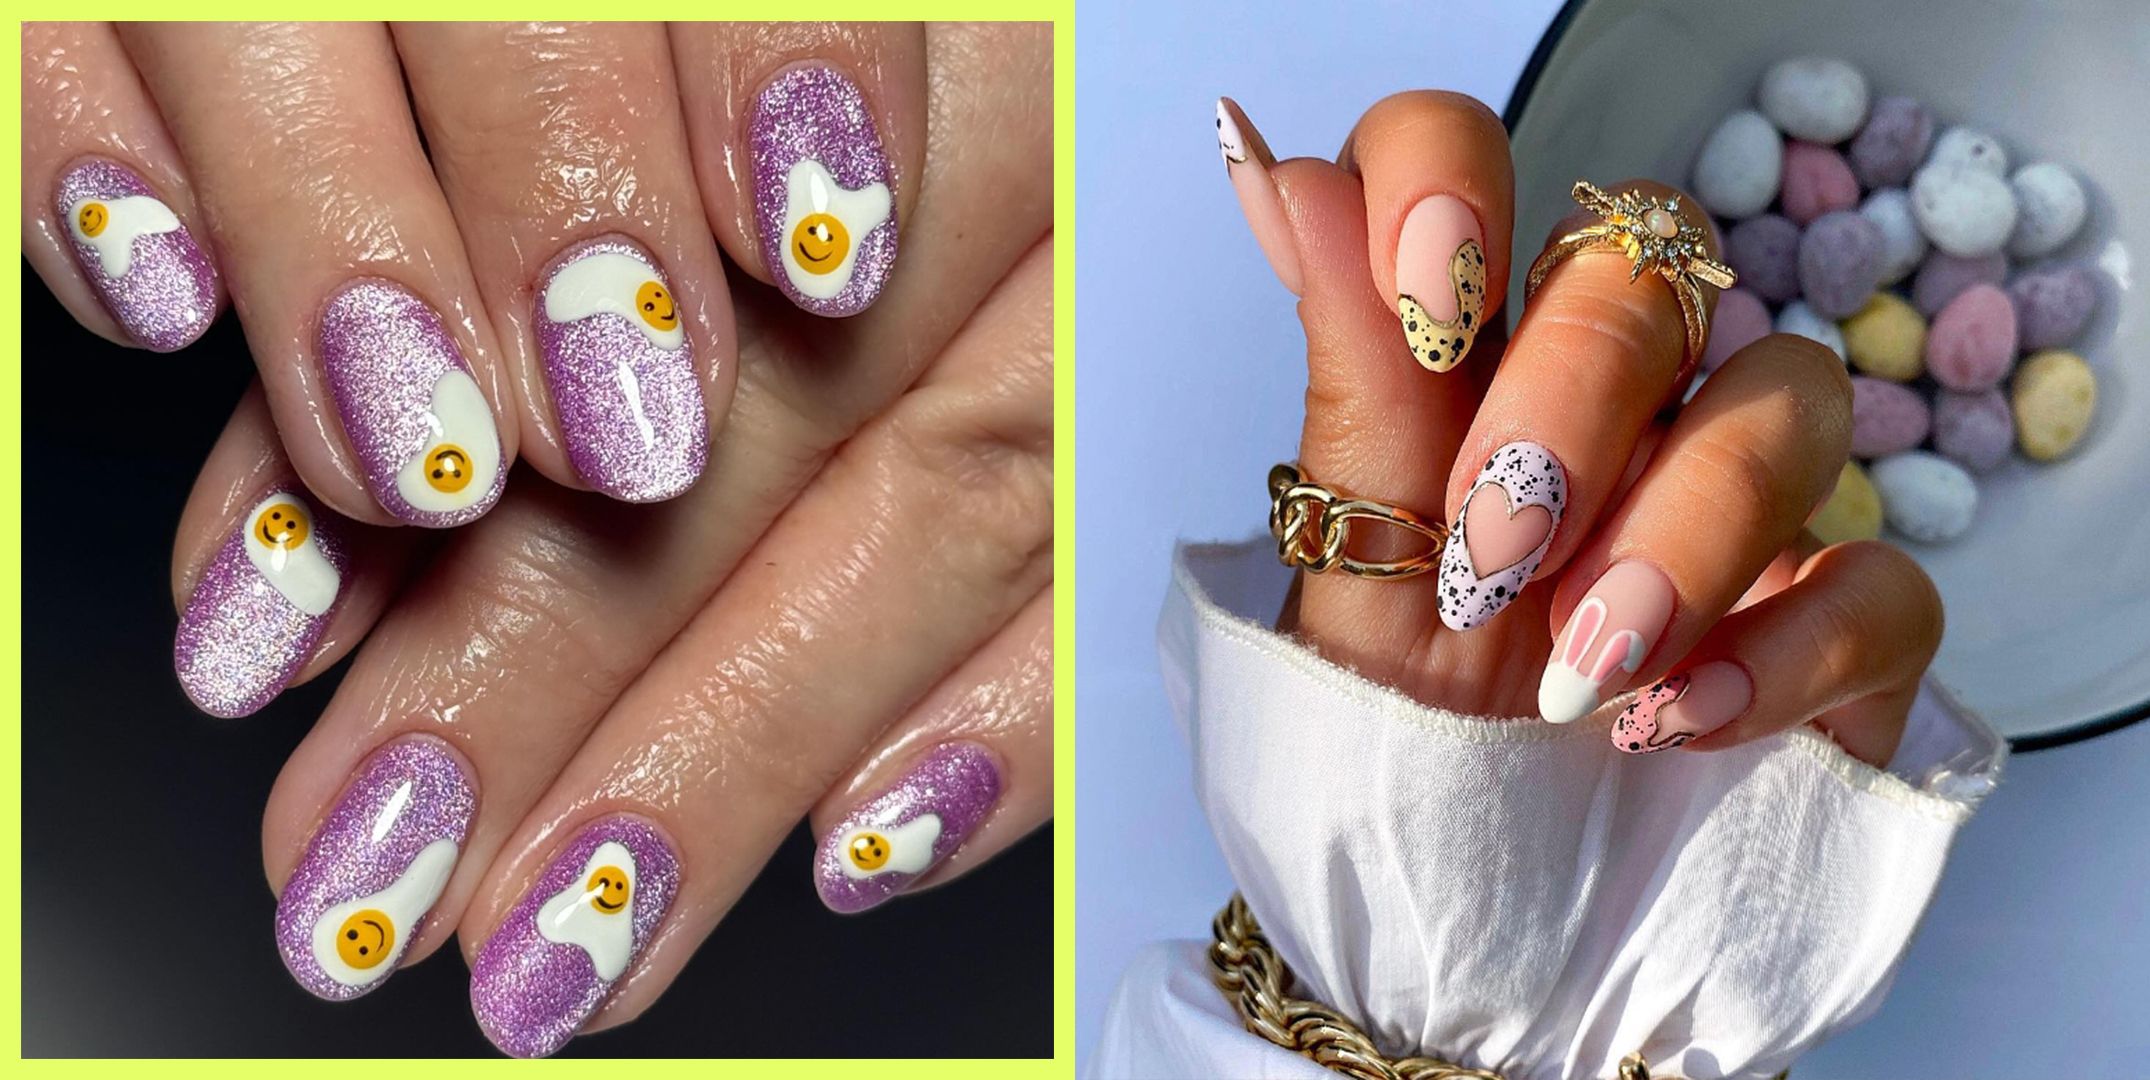 7 Nail Designs To Save For Your Spring Moodboard - beautyheaven